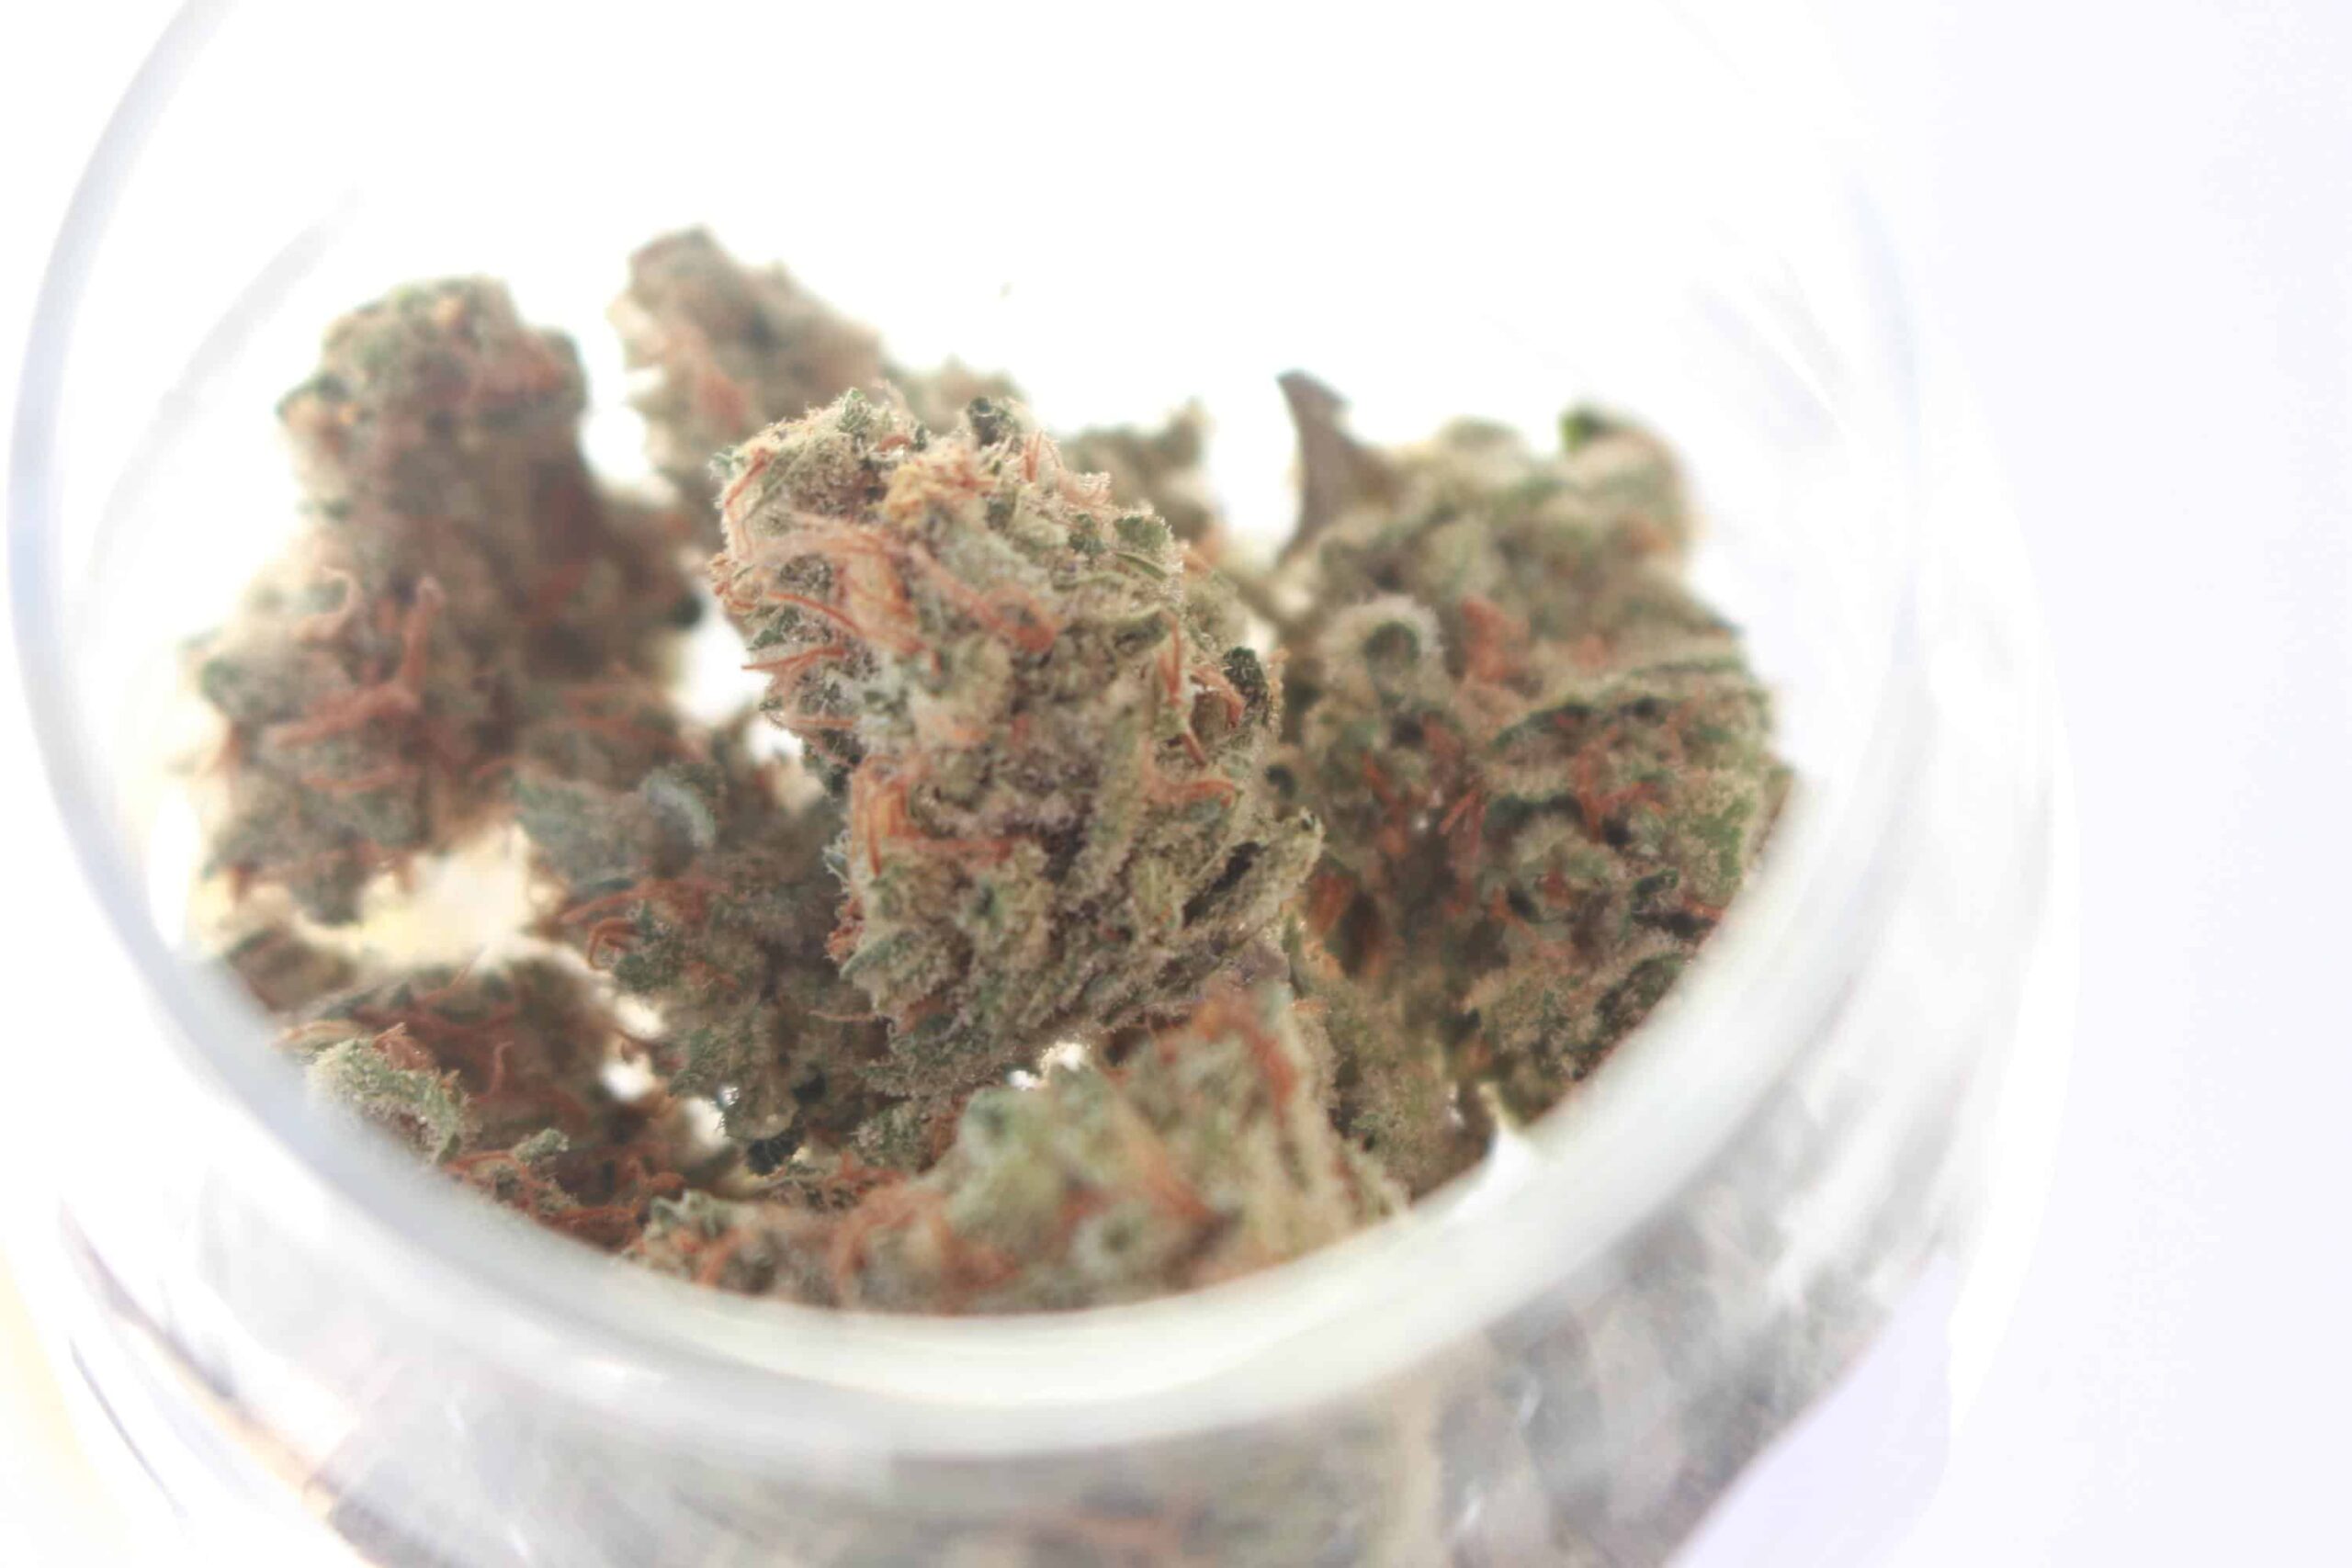 bud-cannabis-in-a-medical-container